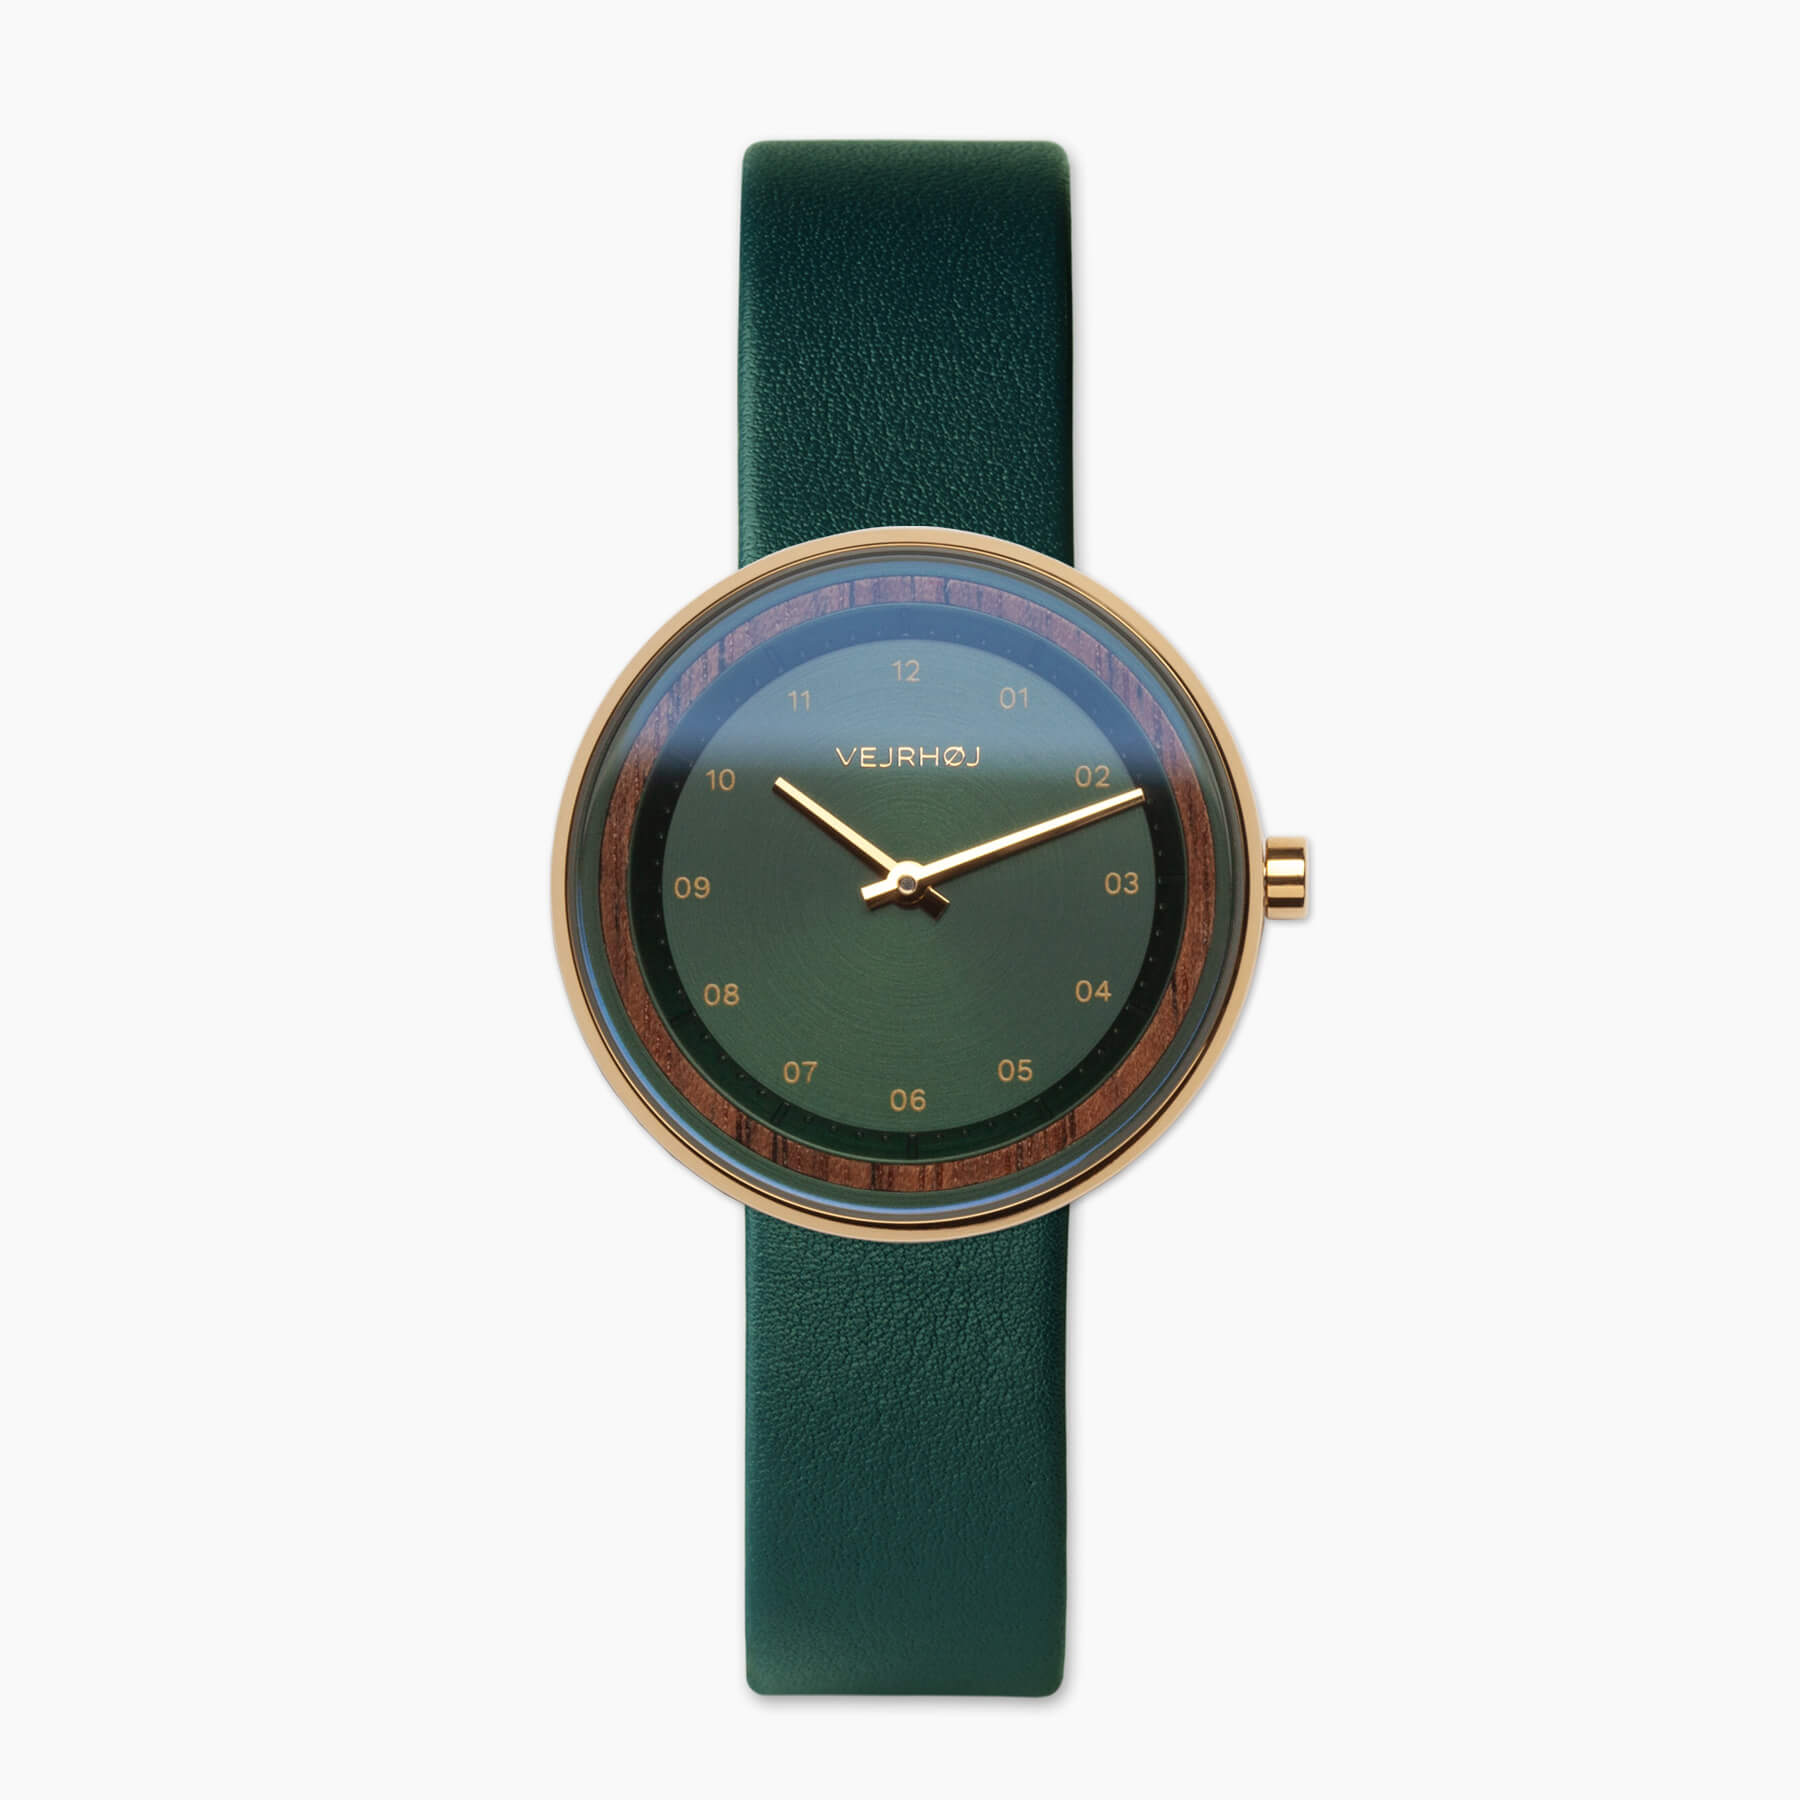 VEJRHØJ green and gold women's watch with a green leather strap and golden hour markings